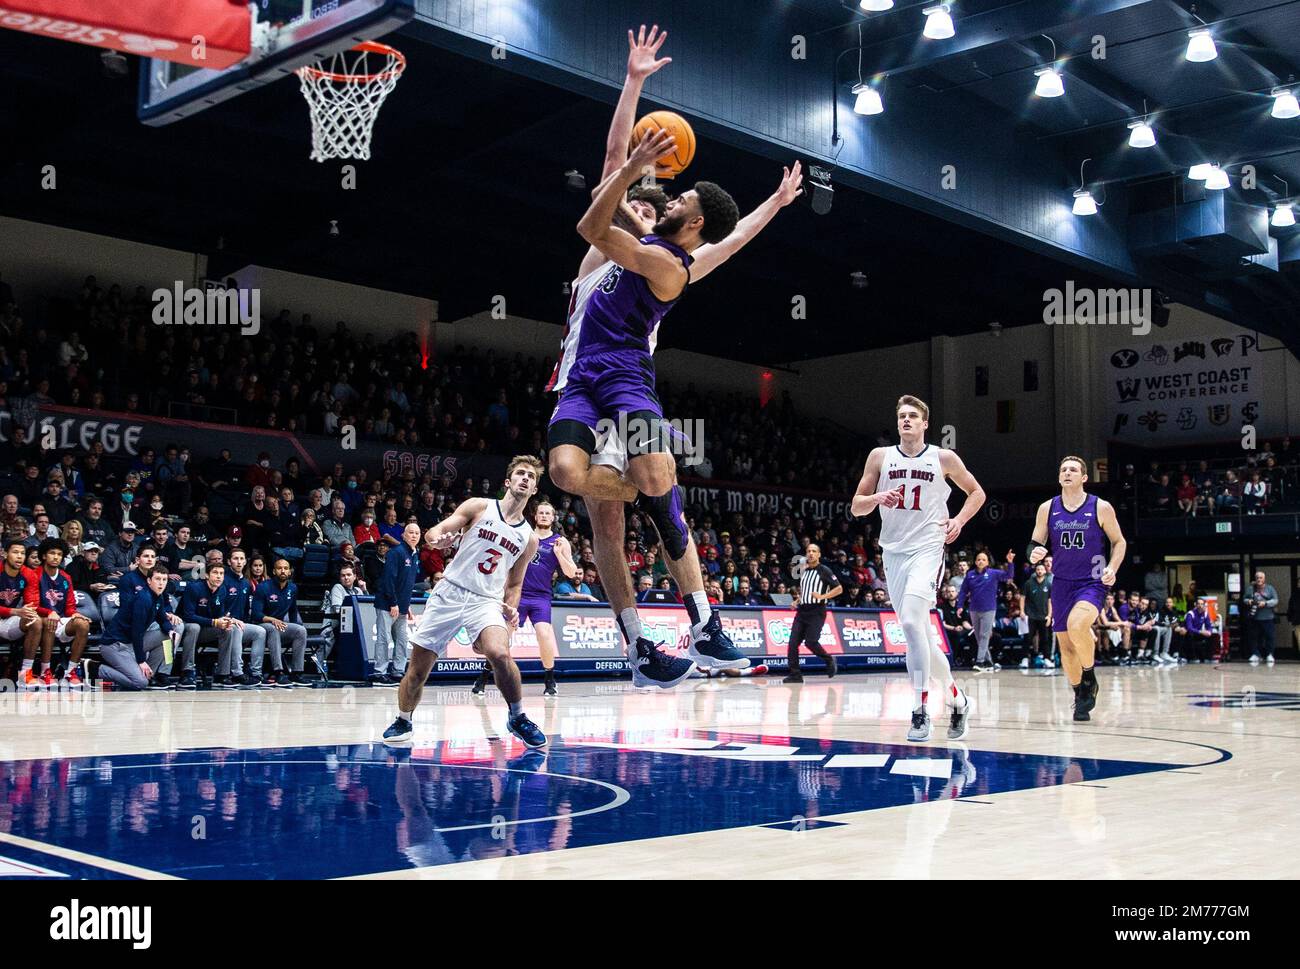 Moraga, CA U.S. 07th Jan, 2023. A. Portland guard Mike Meadows (25)goes to the hoop during the NCAA Men's Basketball game between Portland Pilots and the Saint Mary's Gaels. Saint Mary's beat Portland 85-43 at University Credit Union Pavilion Moraga Calif. Thurman James/CSM/Alamy Live News Stock Photo